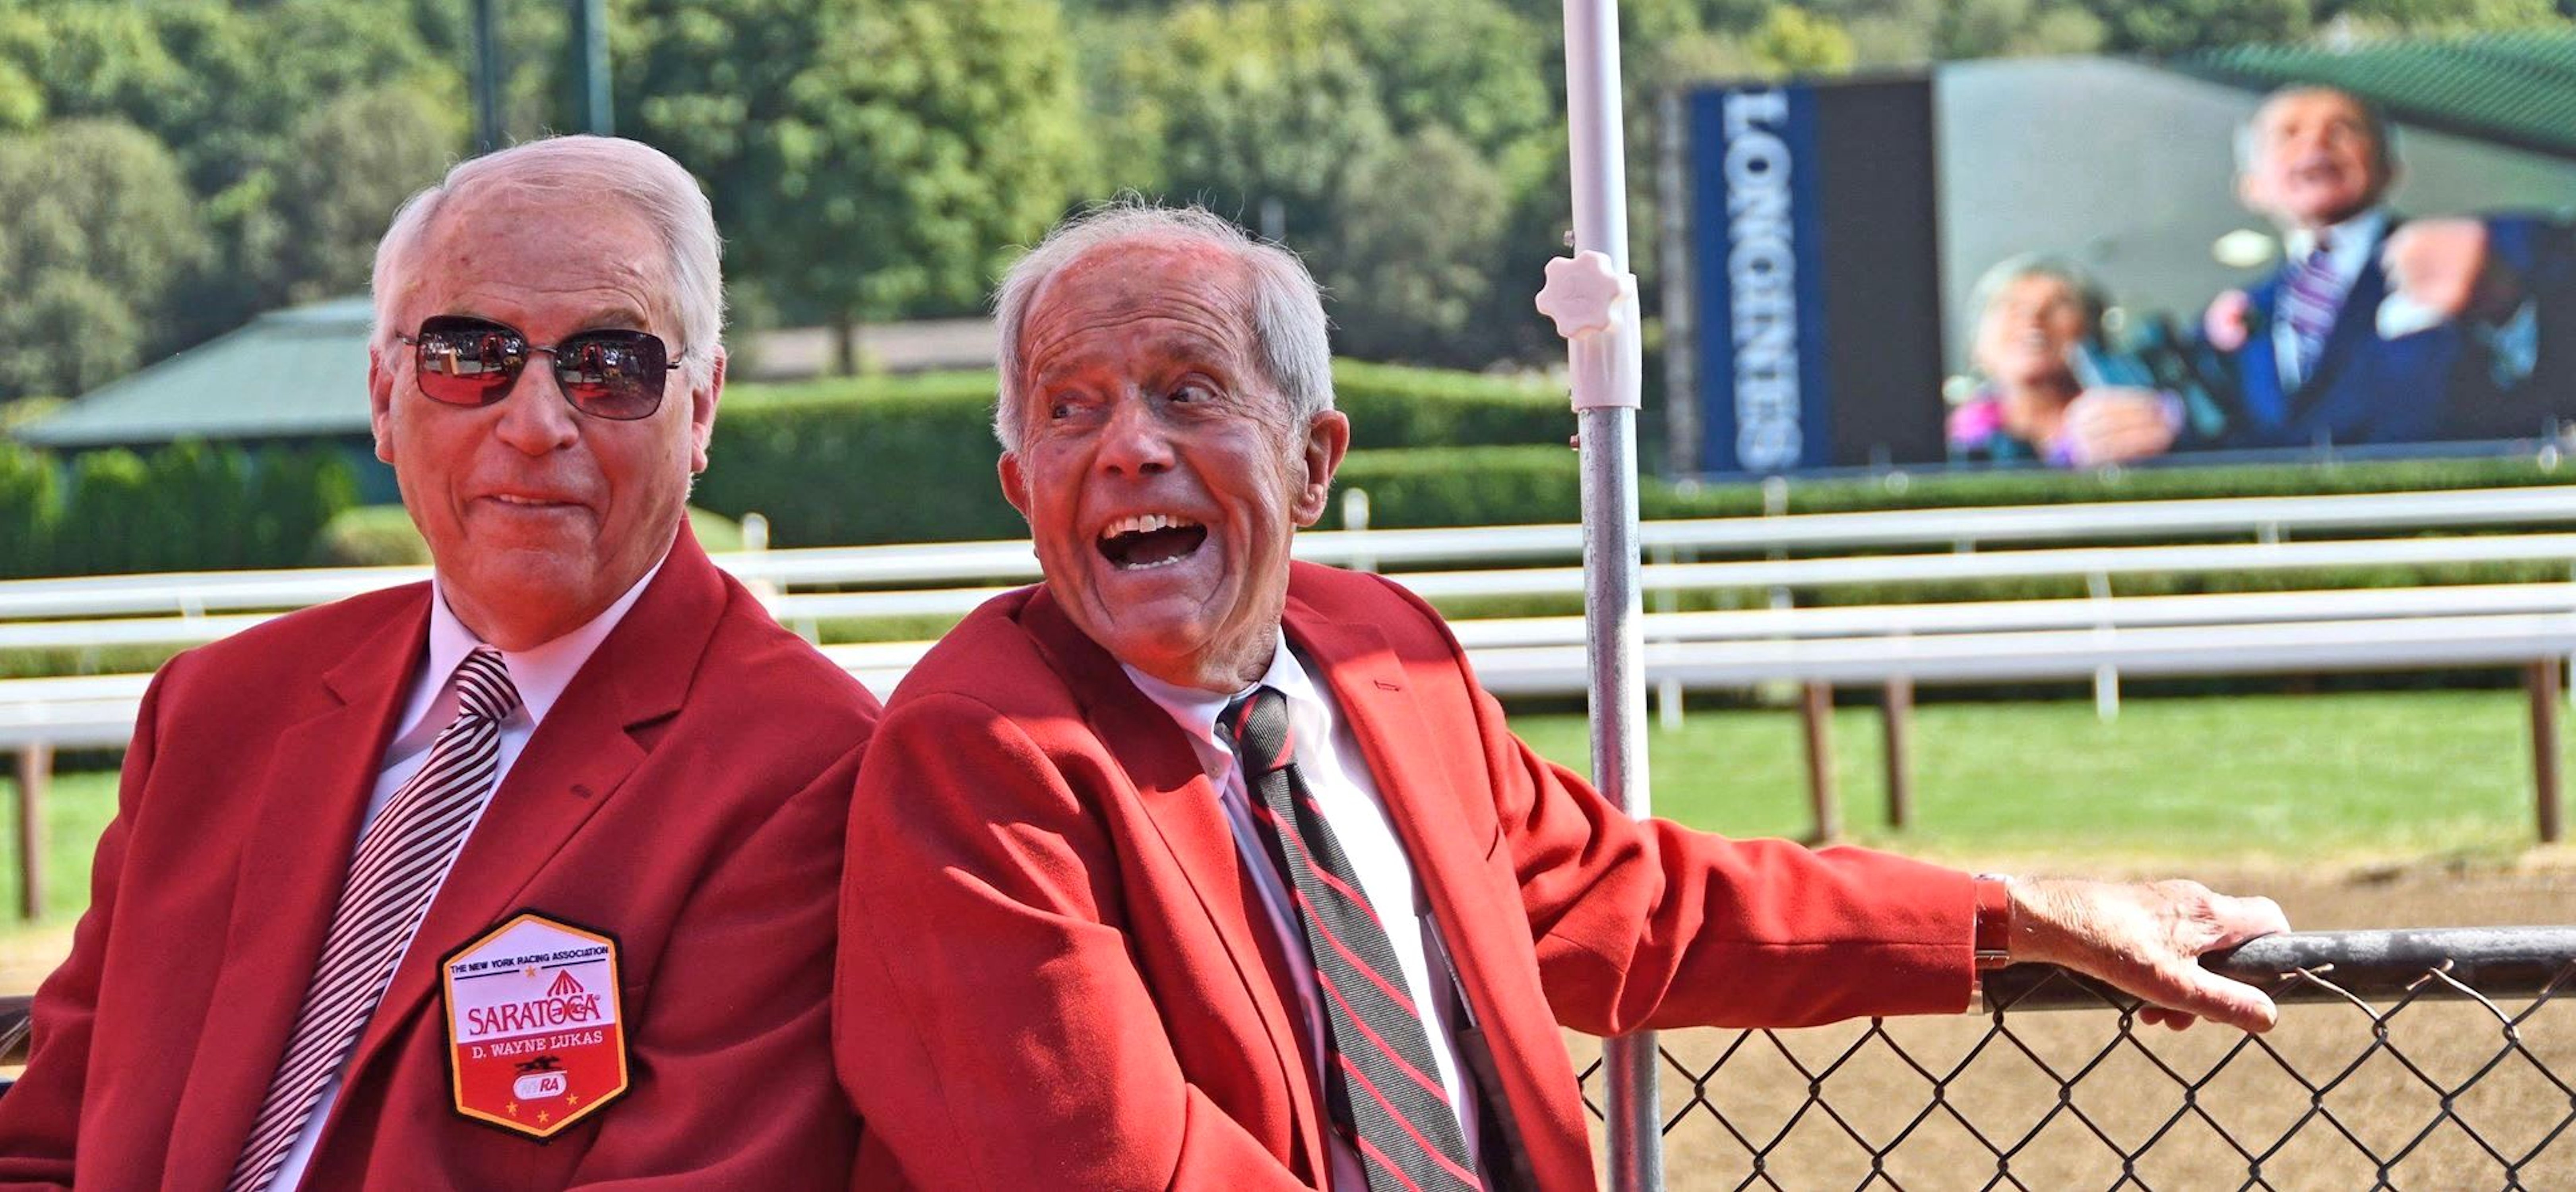 Trainer D. Wayne Lukas and Cot Campbell wear their red jackets during the 2018 Saratoga Walk of Fame ceremony (Barry Bornstein)